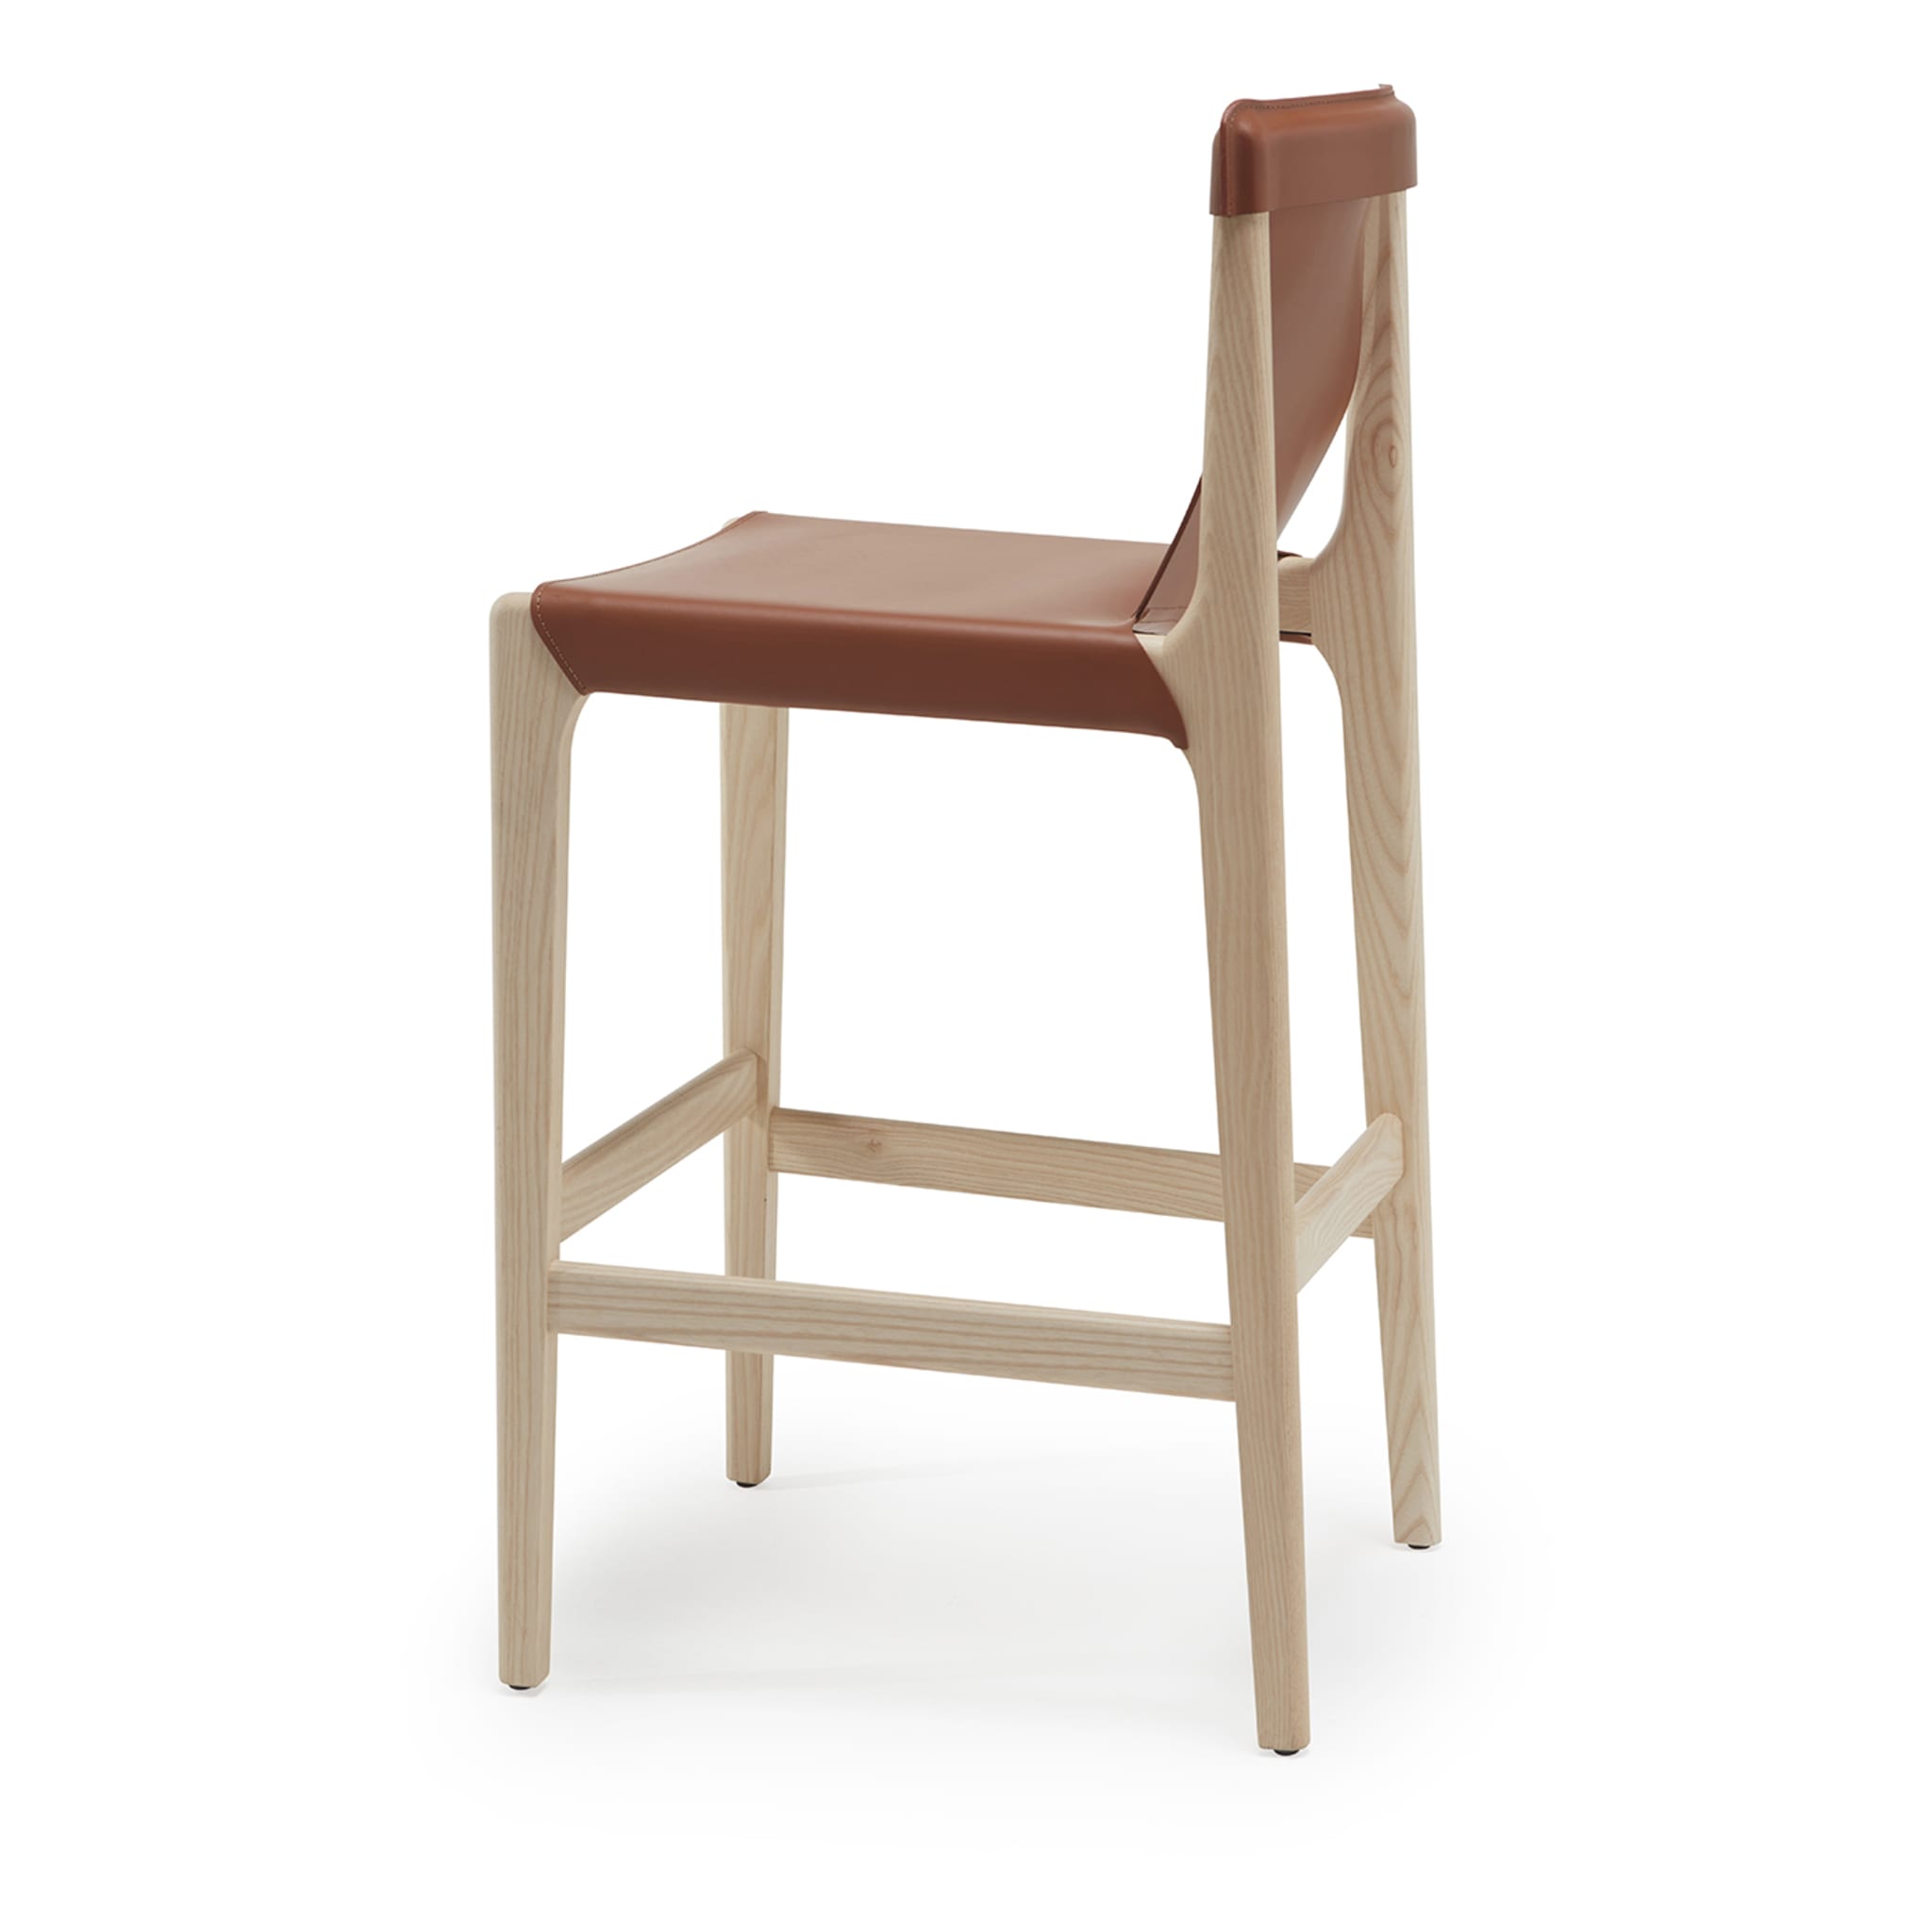 Burano/sg 30 Brown Leather Counter Stool by Balutto Associati - Alternative view 1